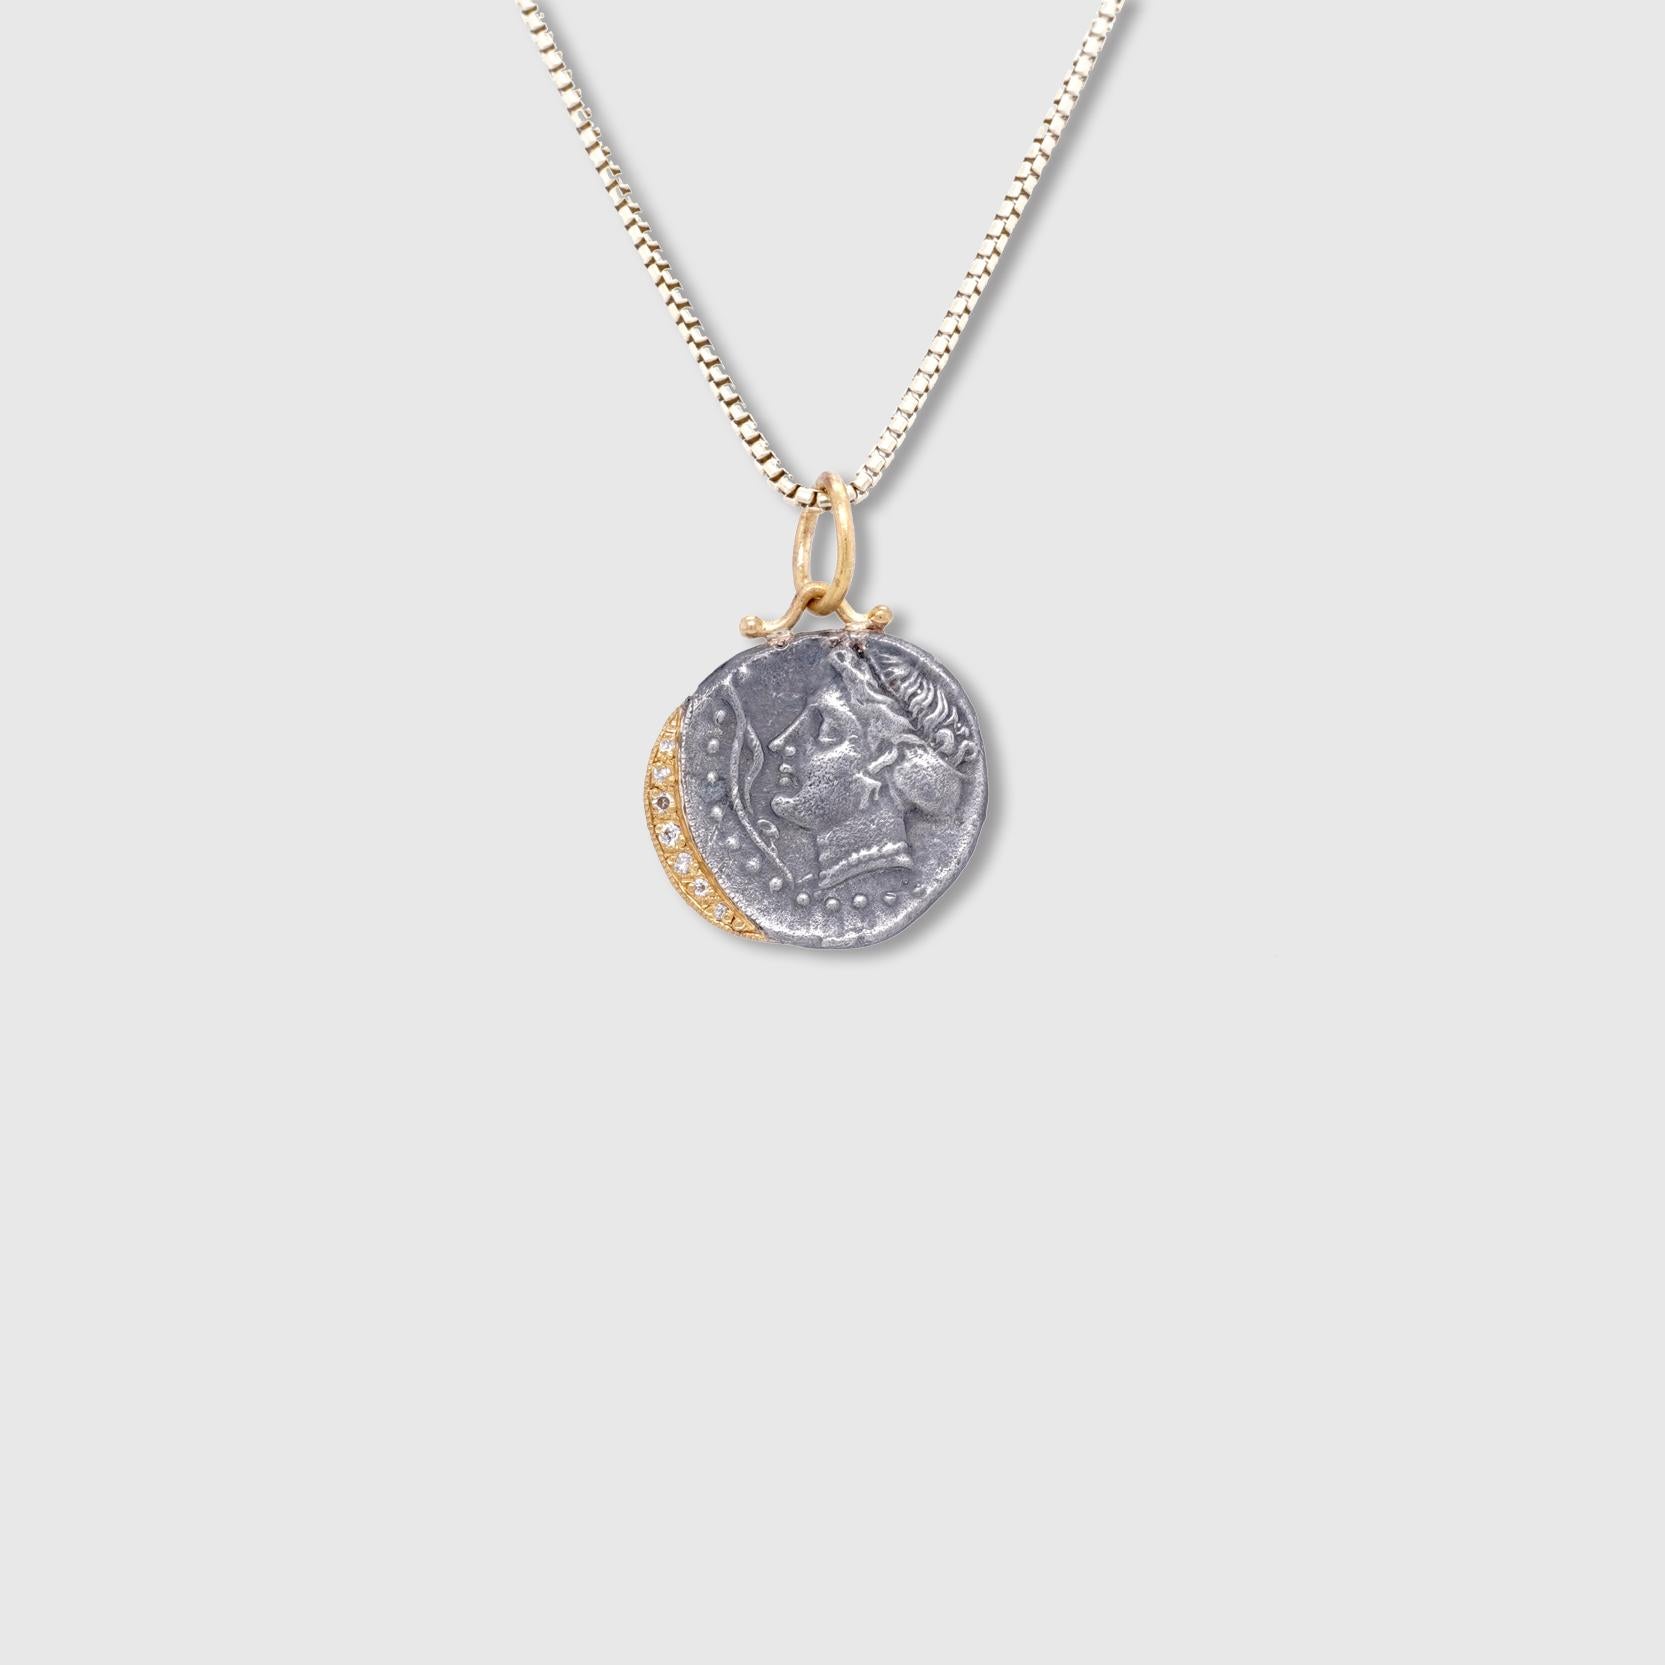 Round Cut Water Nymph, Synope, Pendant Necklace Charm Coin Amulet with Diamonds, 24kt Gold